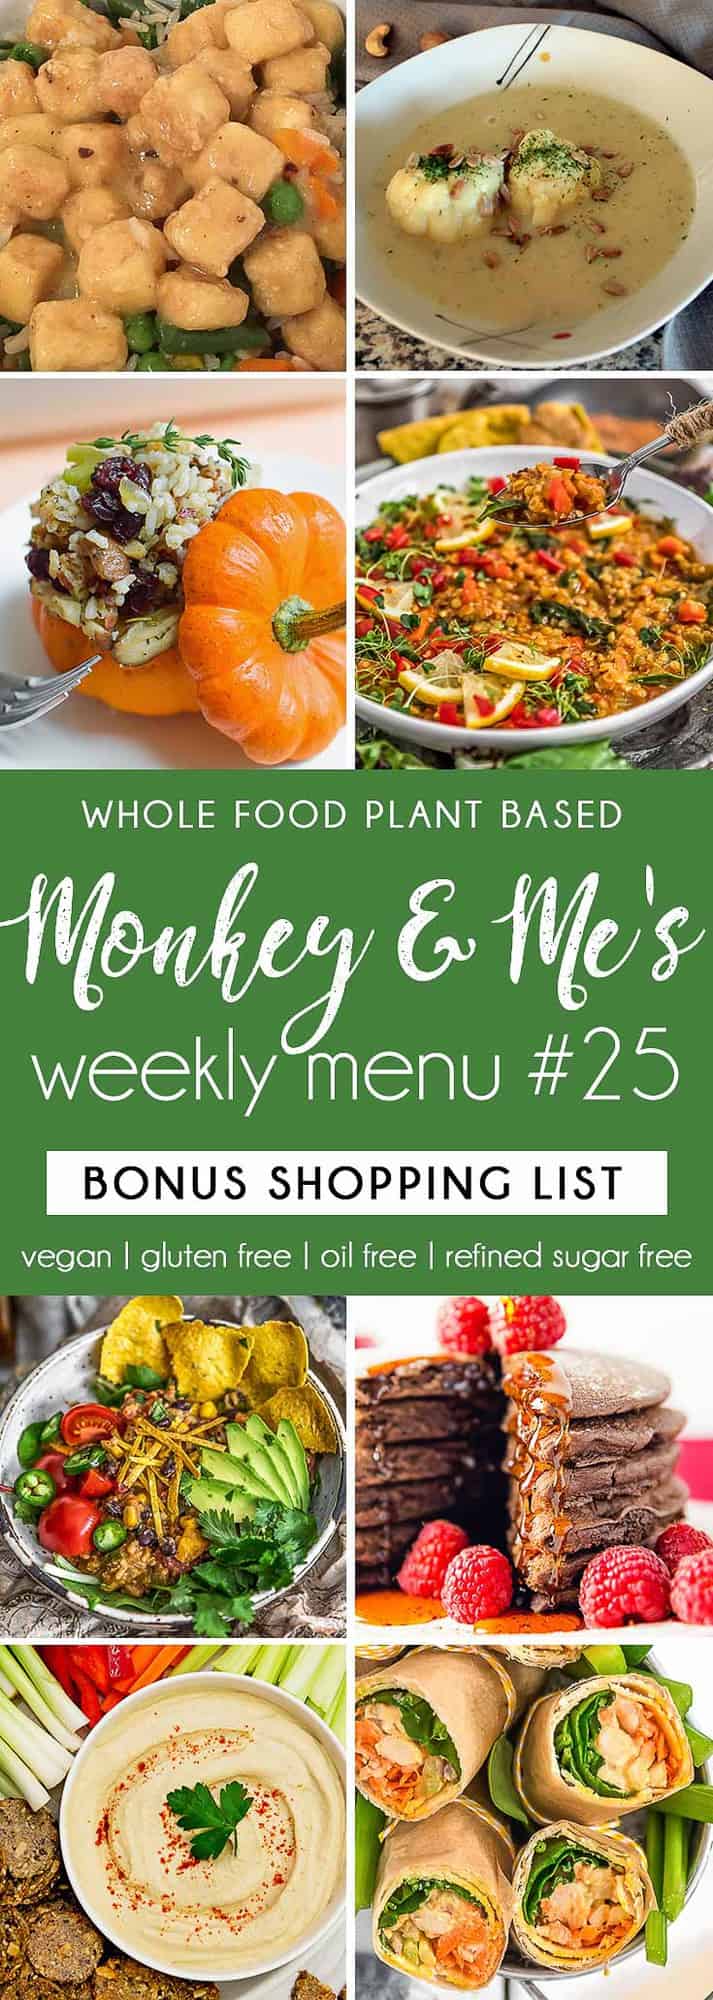 Monkey and Me's Menu 25 featuring 8 recipes